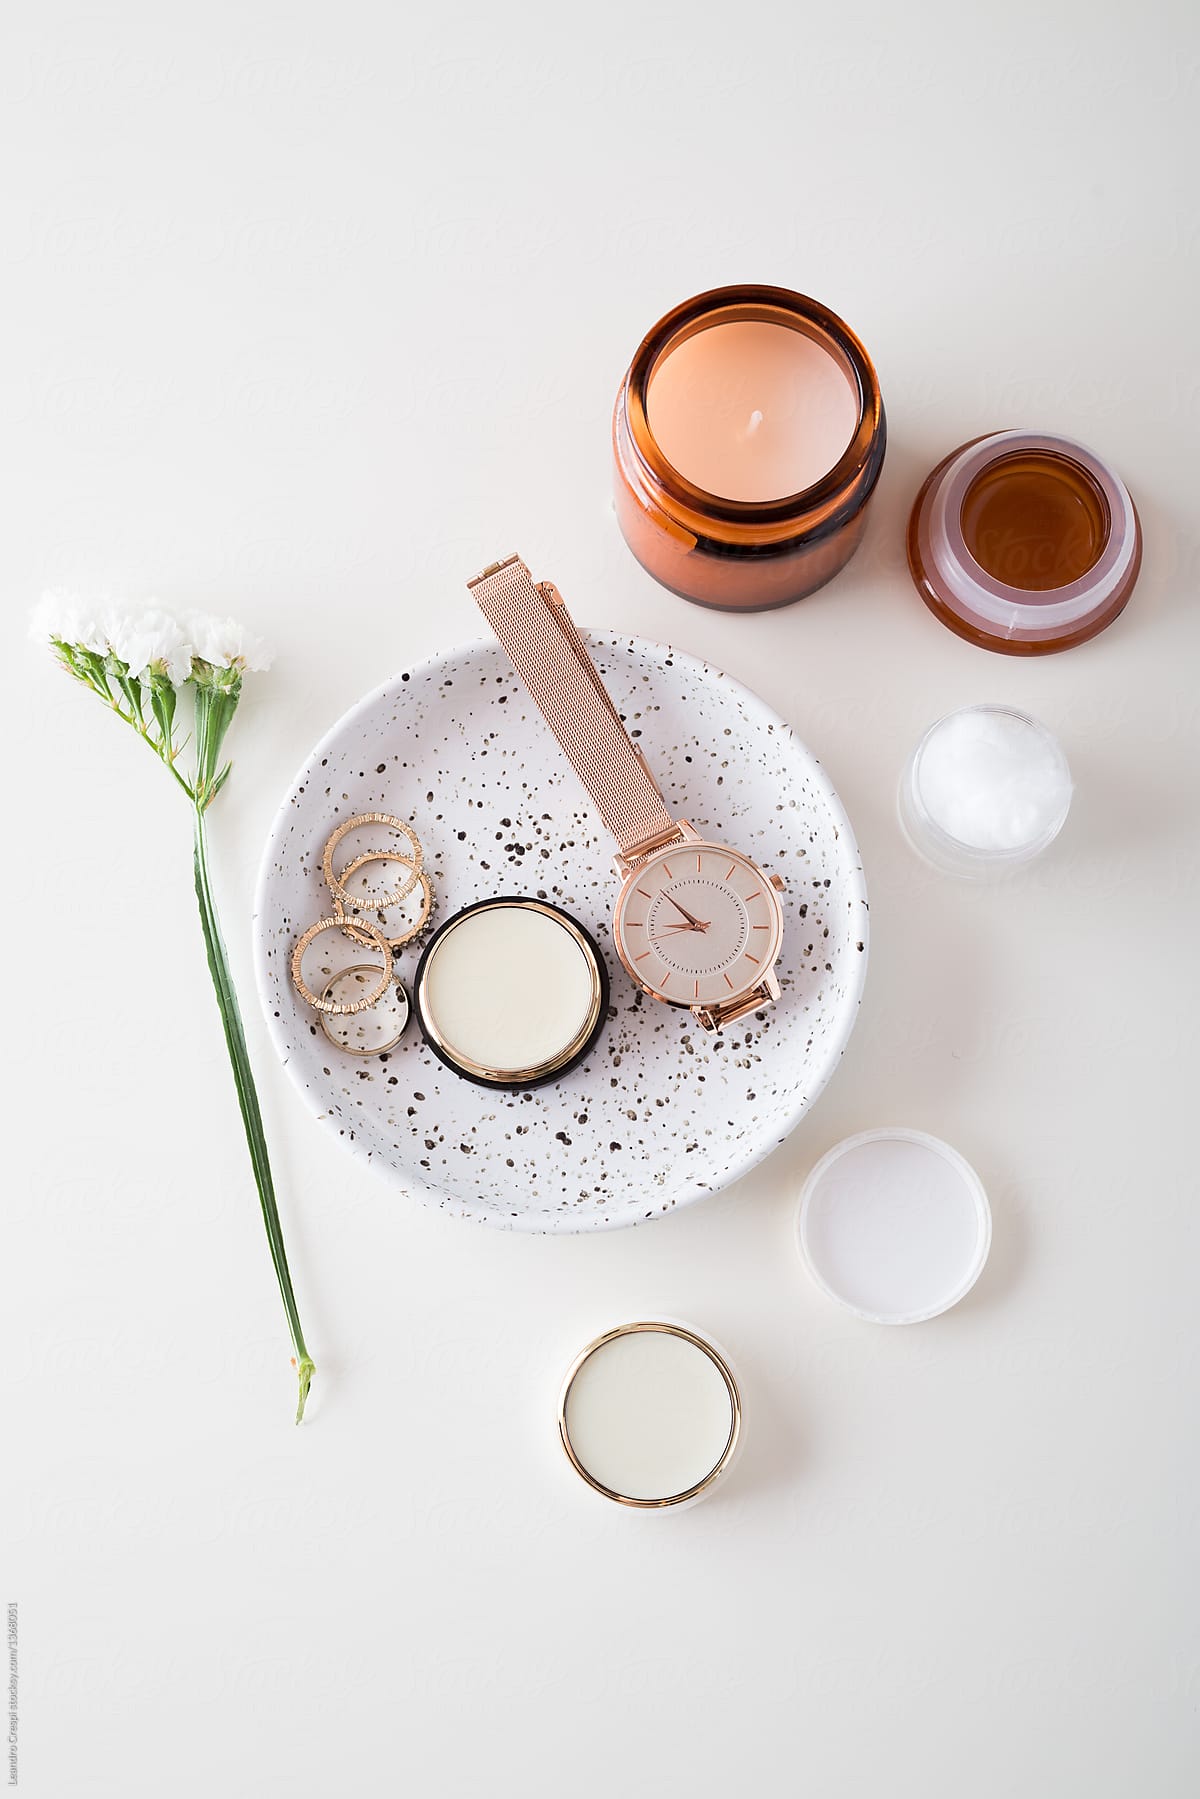 Sidetable Skincare Products By Stocksy Contributor Ohlamour Studio Stocksy